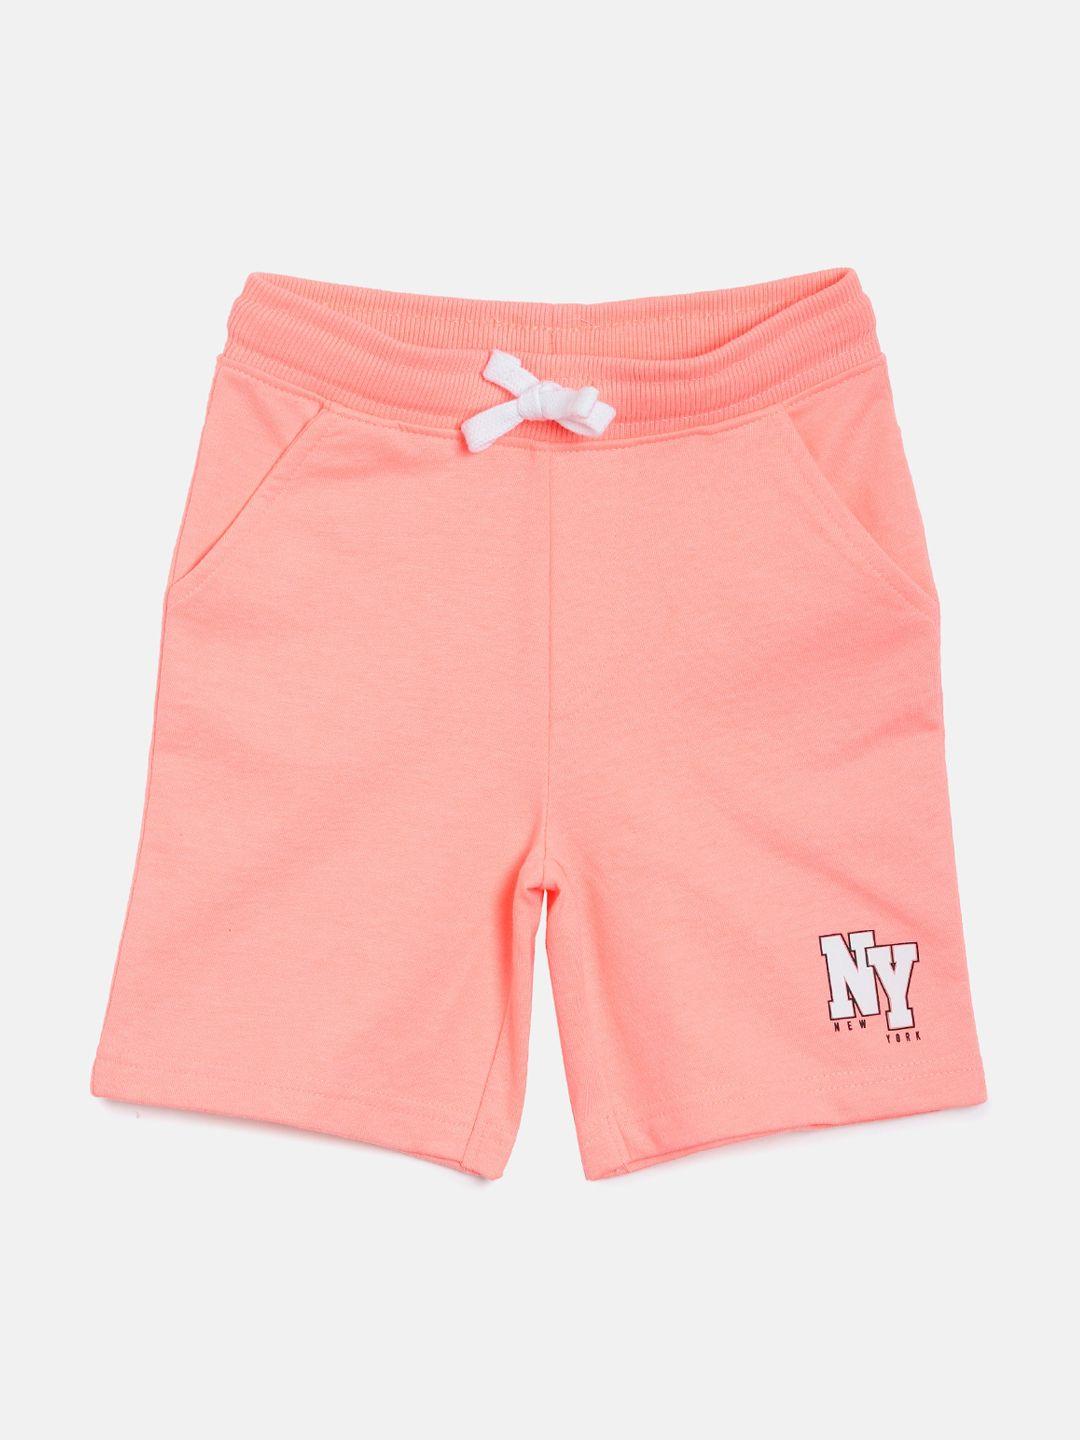 3pin-boys-peach-coloured-solid-regular-fit-cotton-shorts